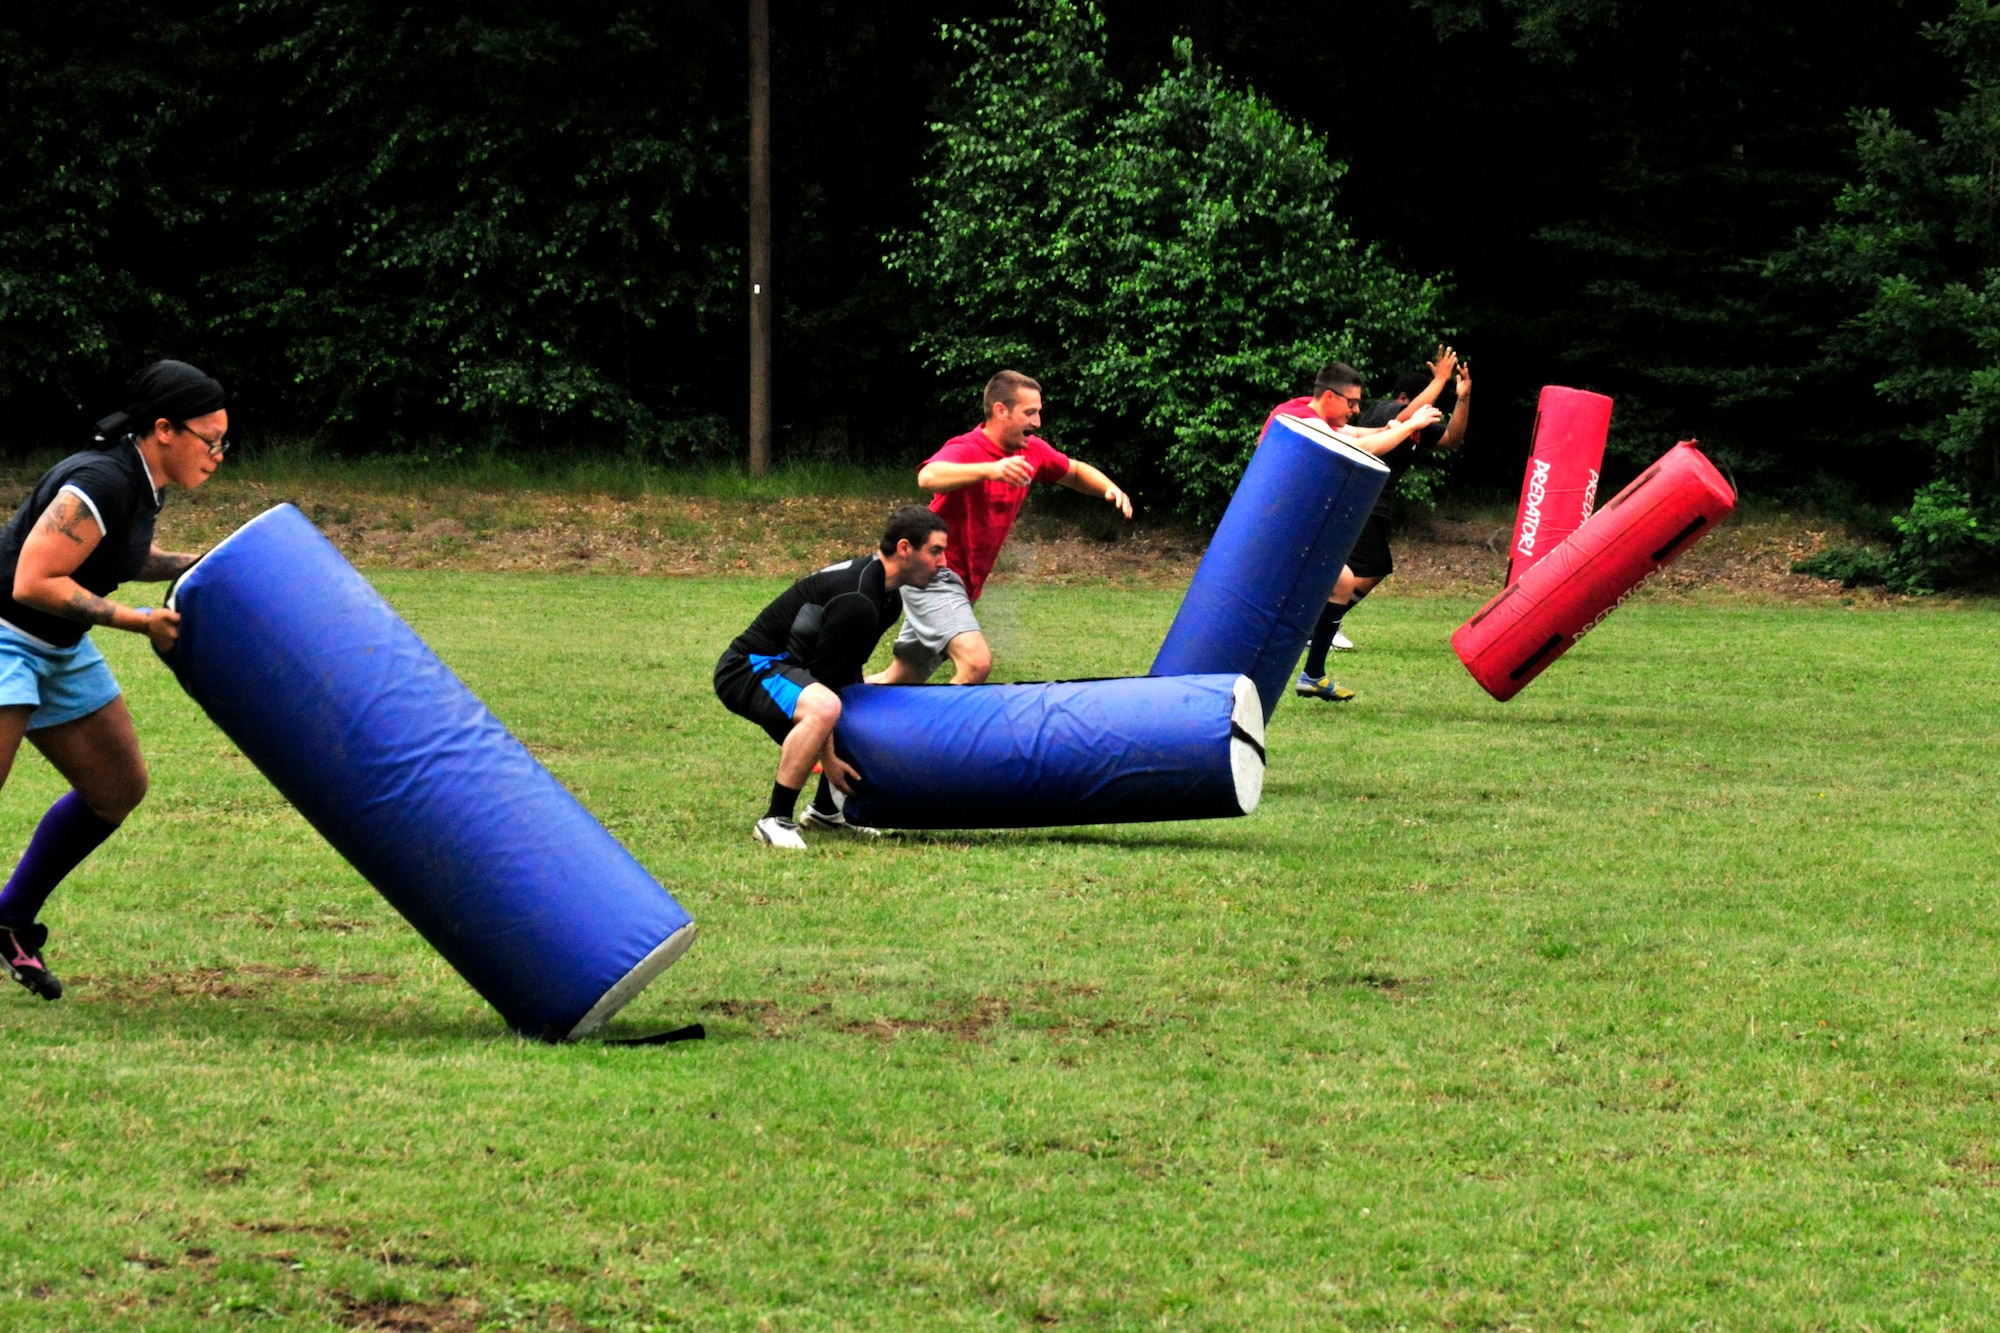 Members of the Ramstein Rogues rugby team flip equipemt duiring a strength and agility exercise during a preseason practice at the 435th Construction Training Squadron rugby pitch at Ramstein Air Base, Germany, July 12, 2012. The Rogues have two men's teams and one women's team consisting of Host Nation players, British Royal Air Force and U.S. military Soldiers, Airmen from the Kaiserslautern area and dependents. (U.S. Air Force photo/Airman 1st Class Trevor Rhynes) 
